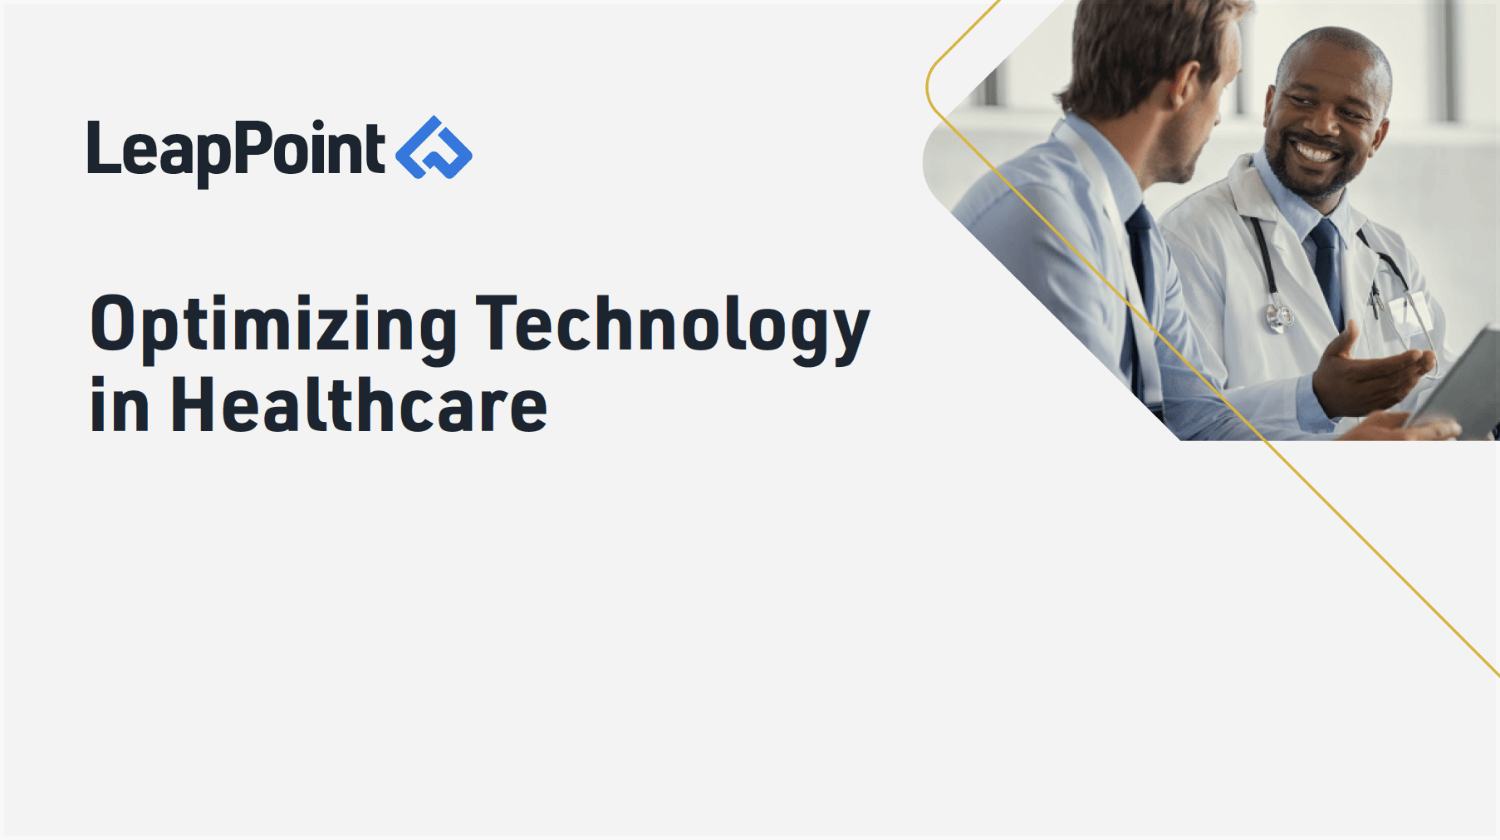 LeapPoint optimizing technology in healthcare